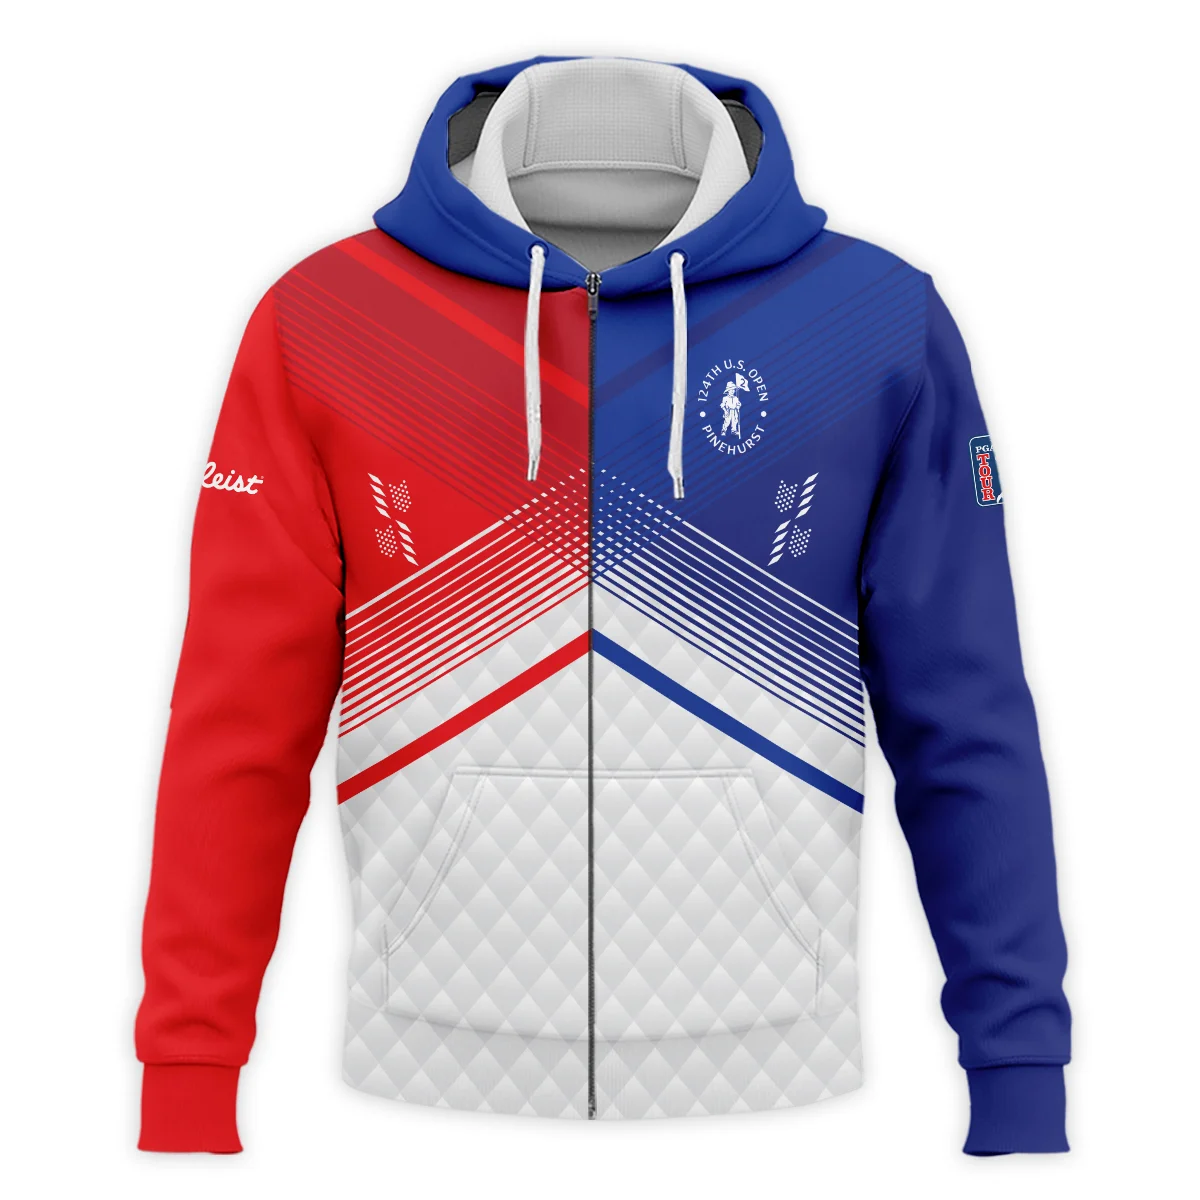 Titleist 124th U.S. Open Pinehurst Blue Red Line White Abstract Quarter-Zip Jacket Style Classic